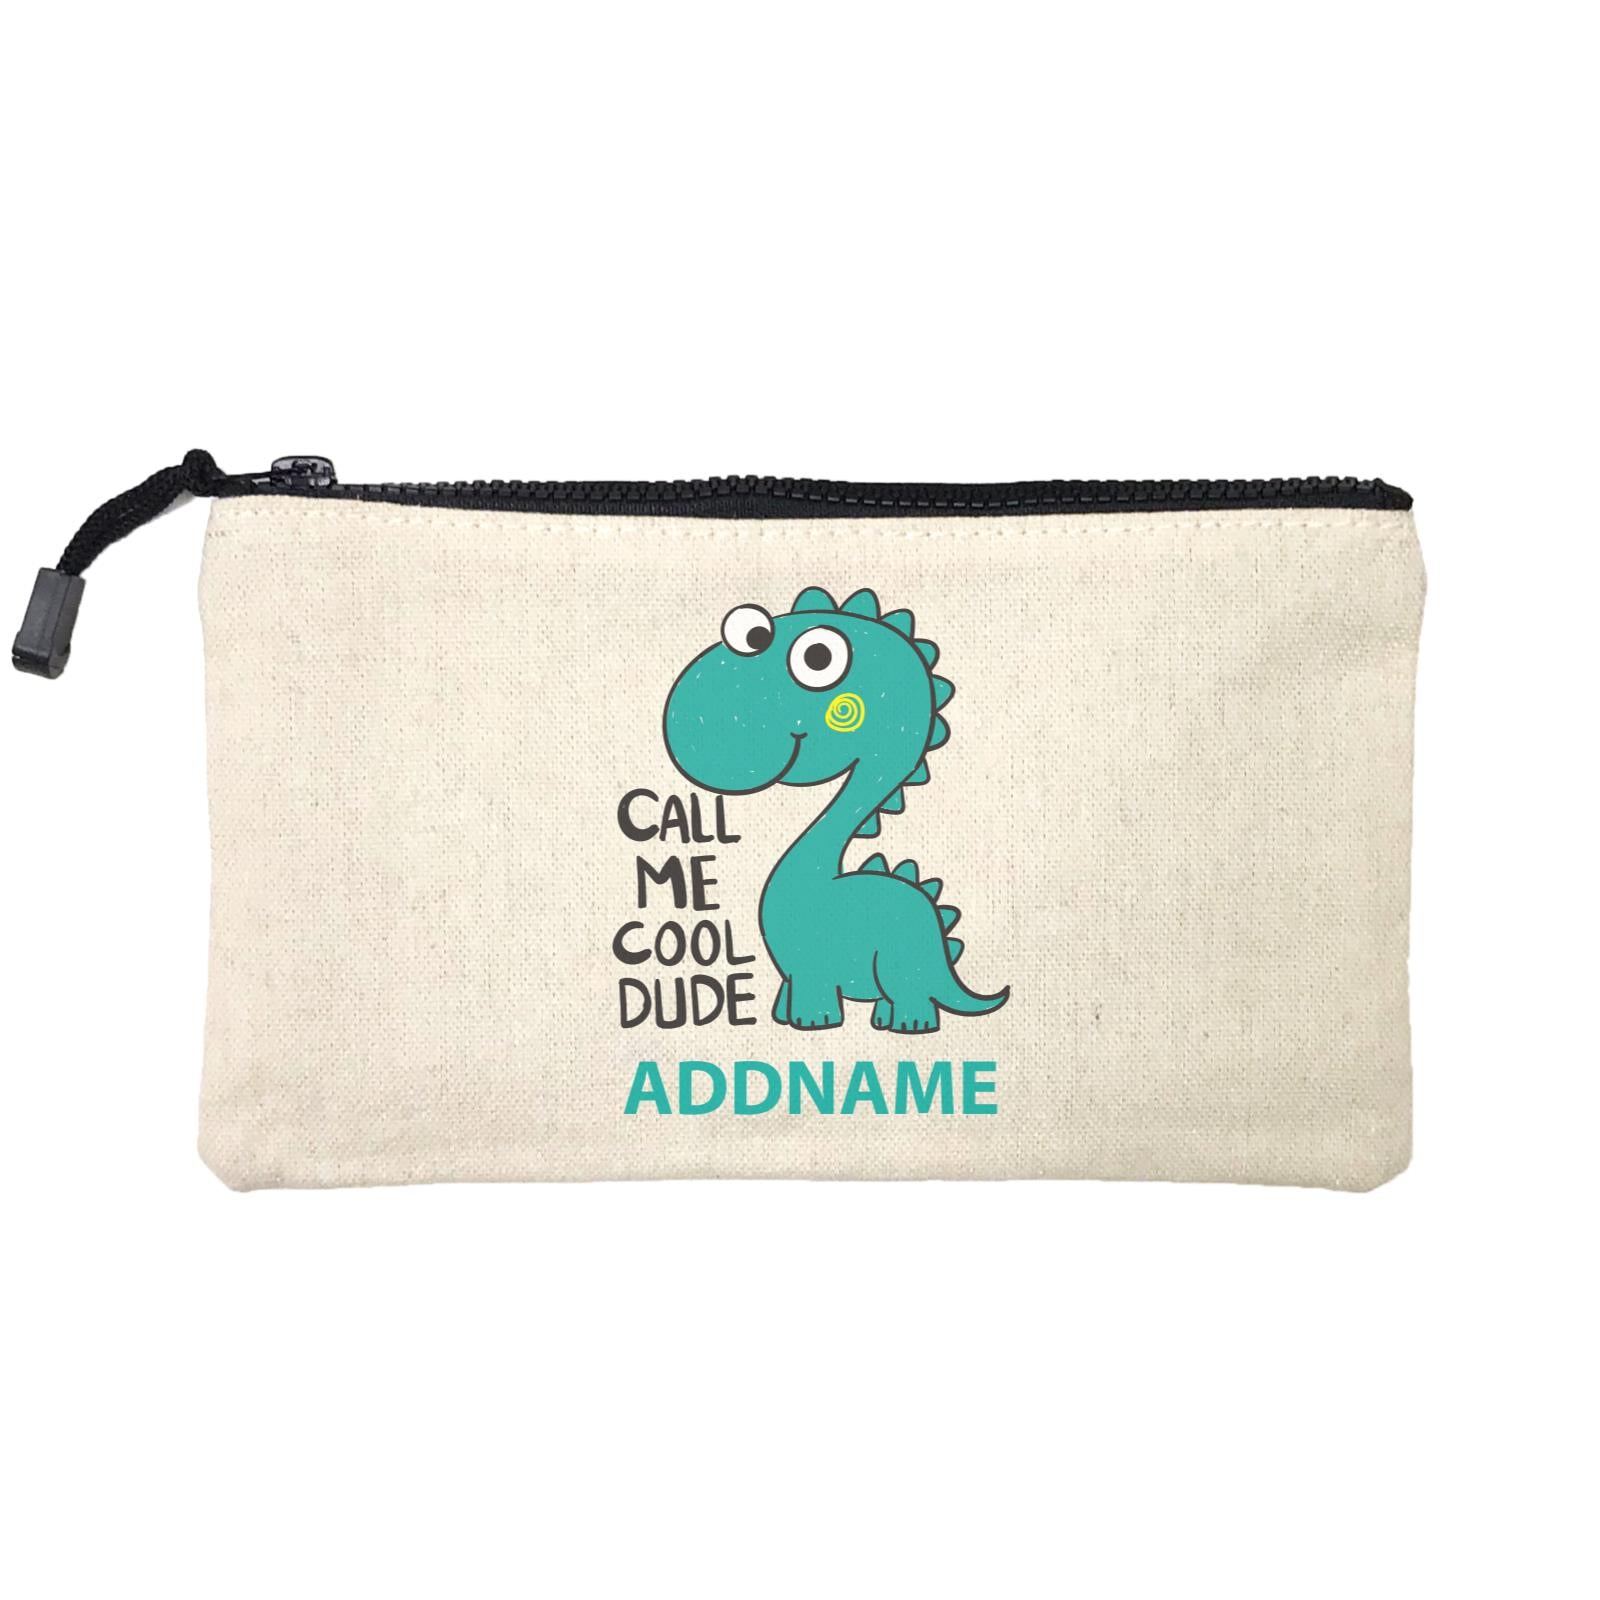 Cool Cute Dinosaur Call Me Cool Dude Addname Mini Accessories Stationery Pouch